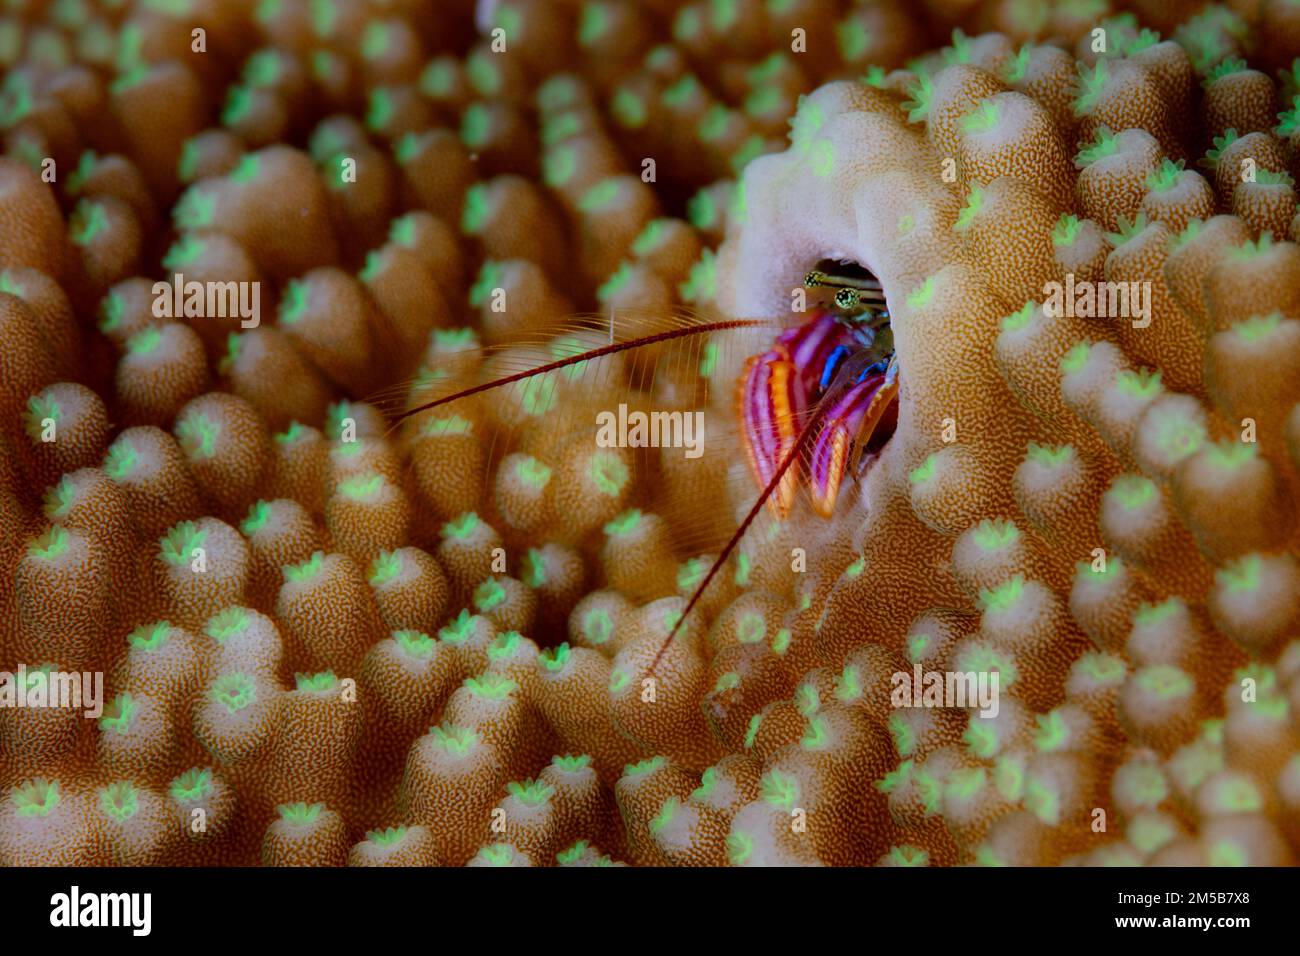 A coral residing hermit crab, Paguritta sp., pokes its colorful claws and eyes out of its protective tube. These tiny hermit crabs feed on plankton. Stock Photo